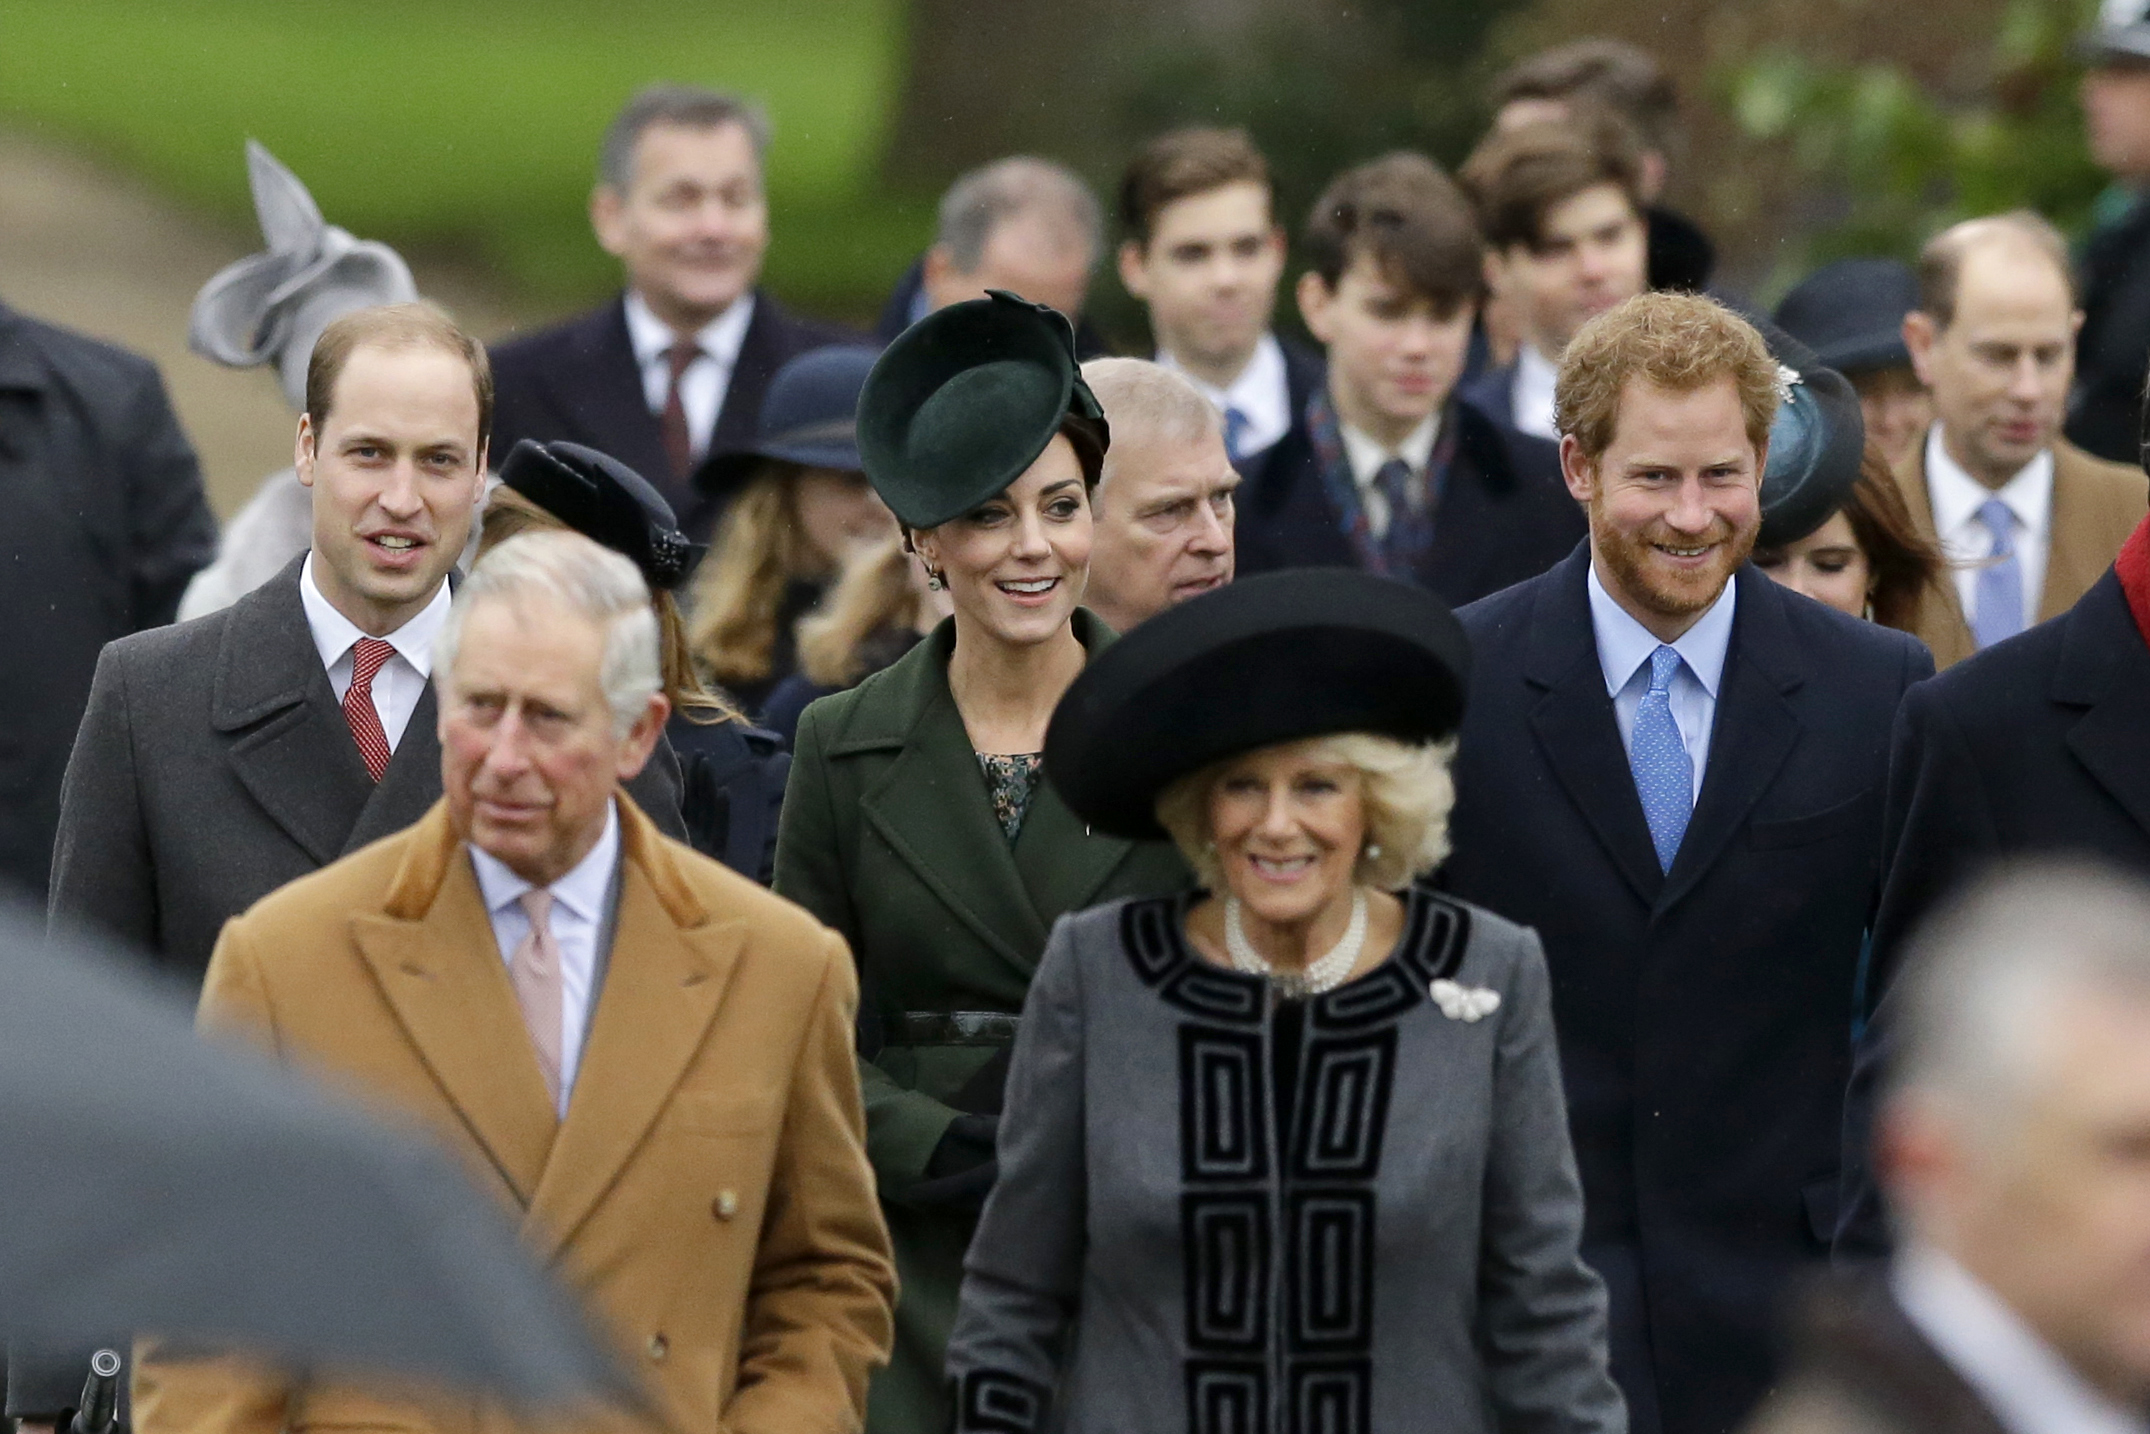 PHOTO: Members of the British royal family attend the traditional Christmas Day church service, at St. Mary Magdalene Church in Sandringham, England, Dec. 25, 2015.